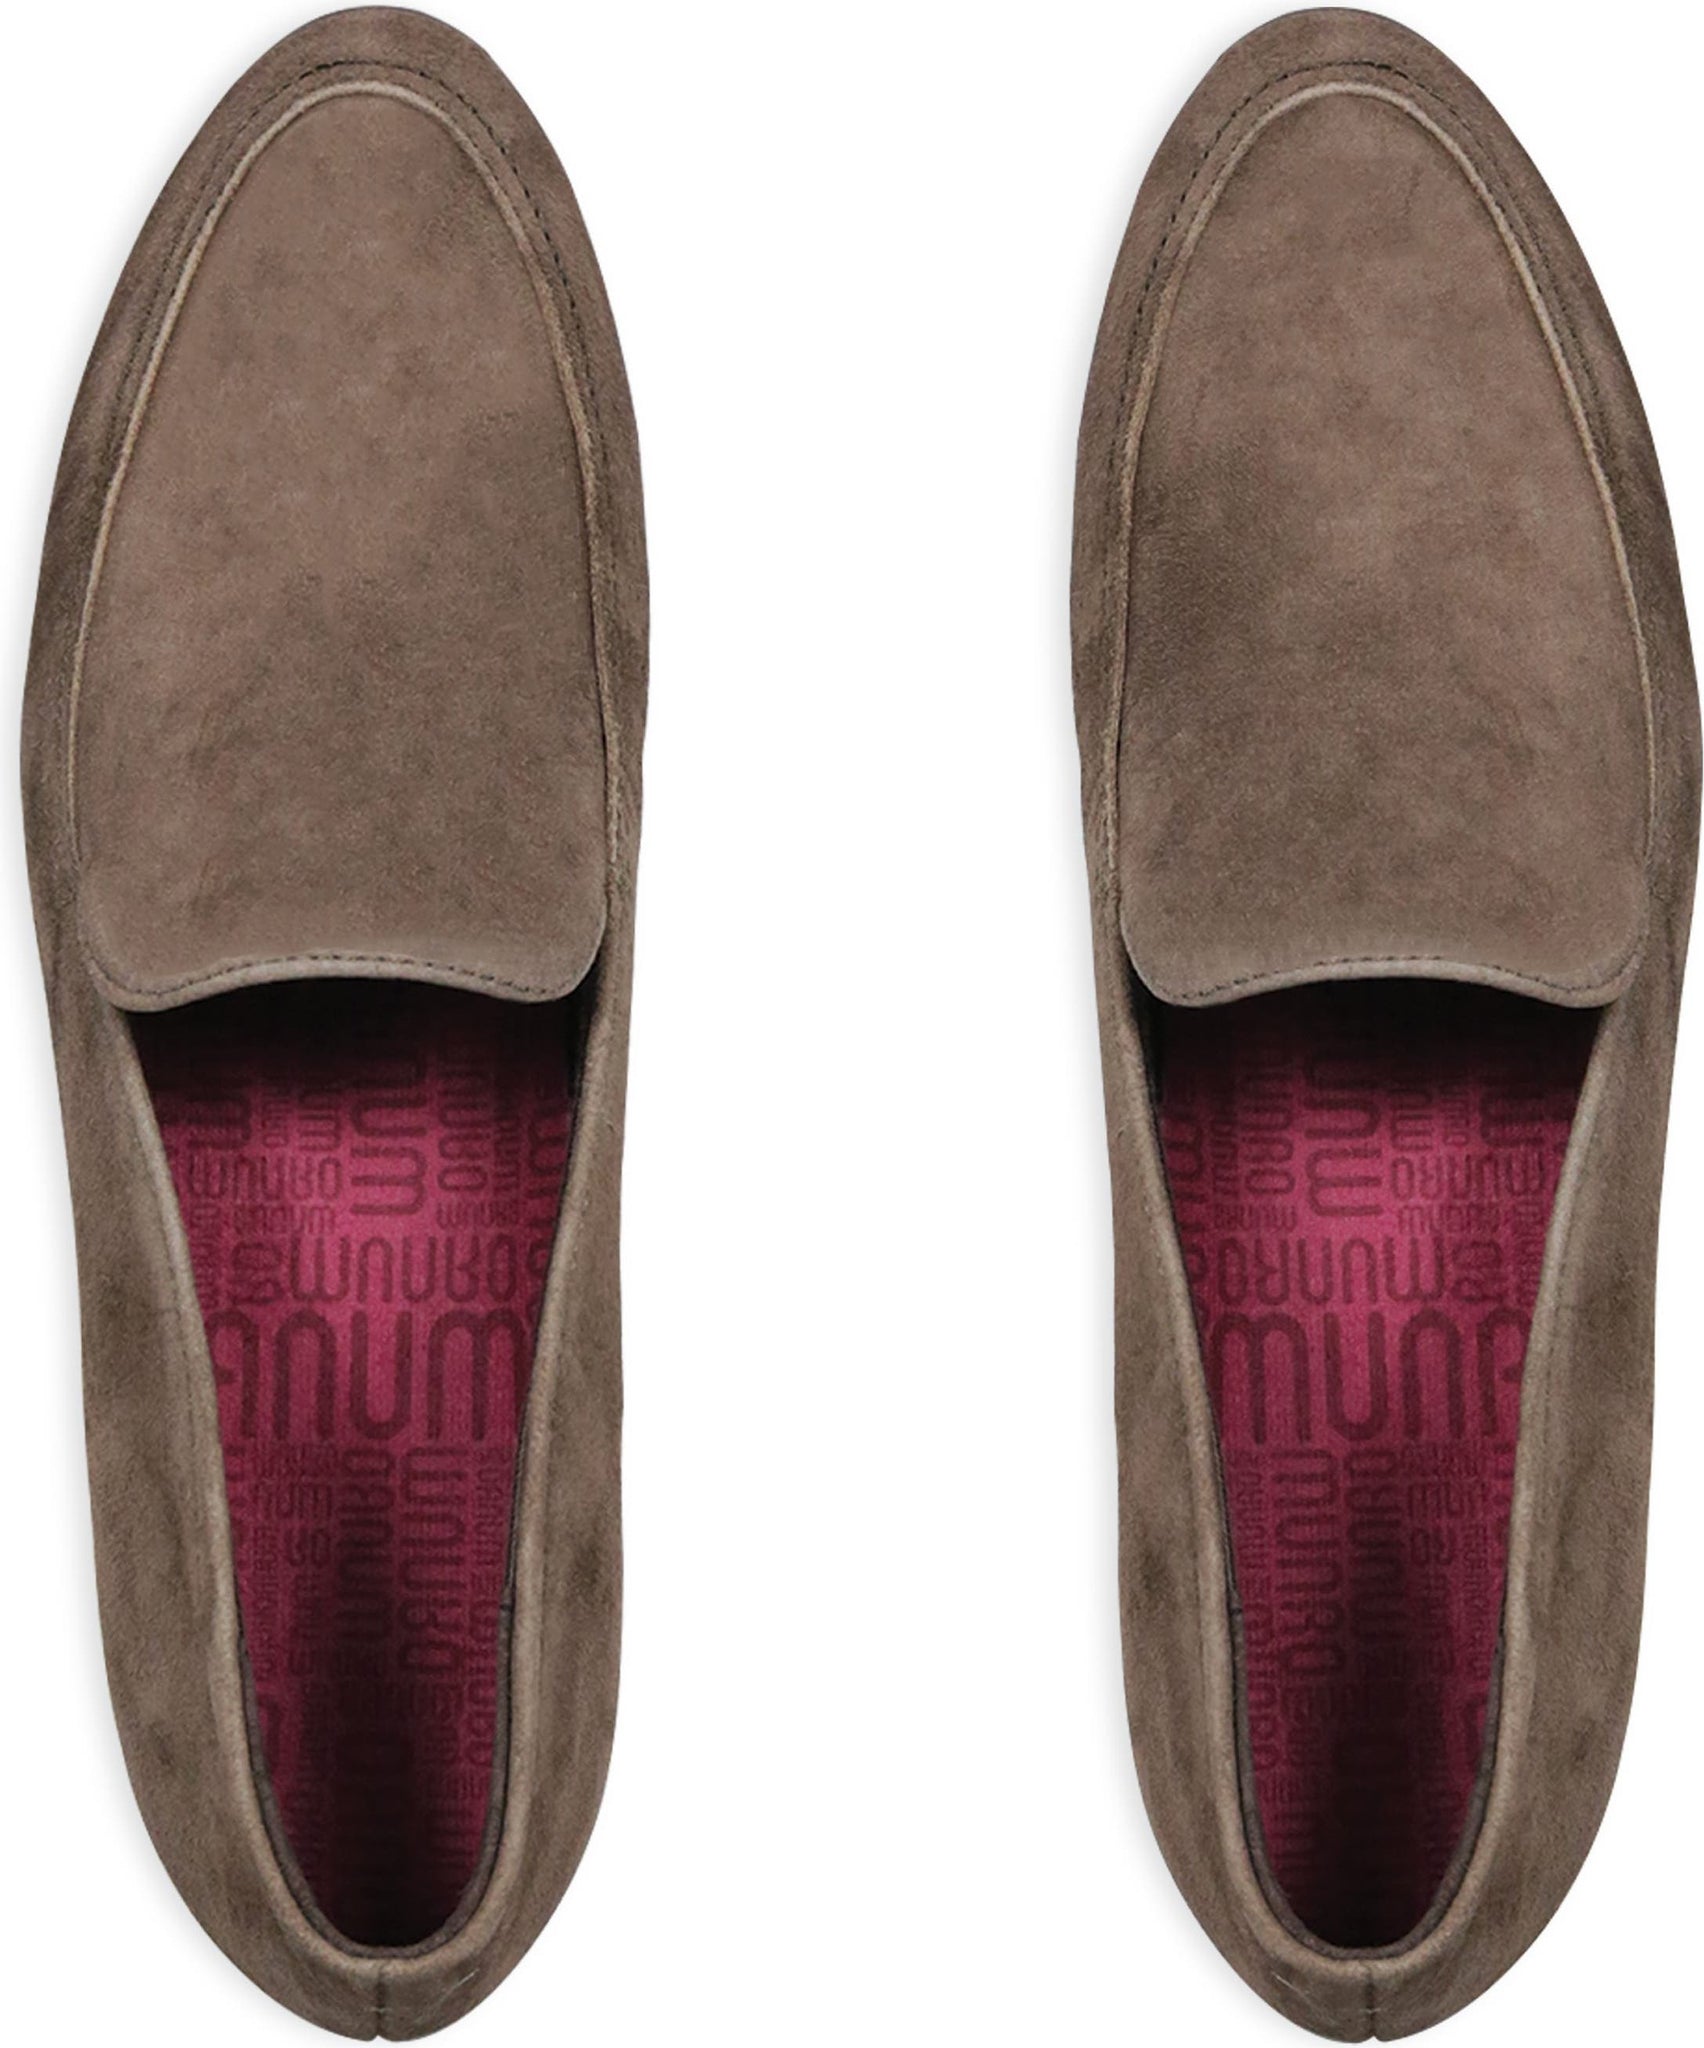 MUNRO Harrison Loafer, Main, color, SEAL GREY SUEDE